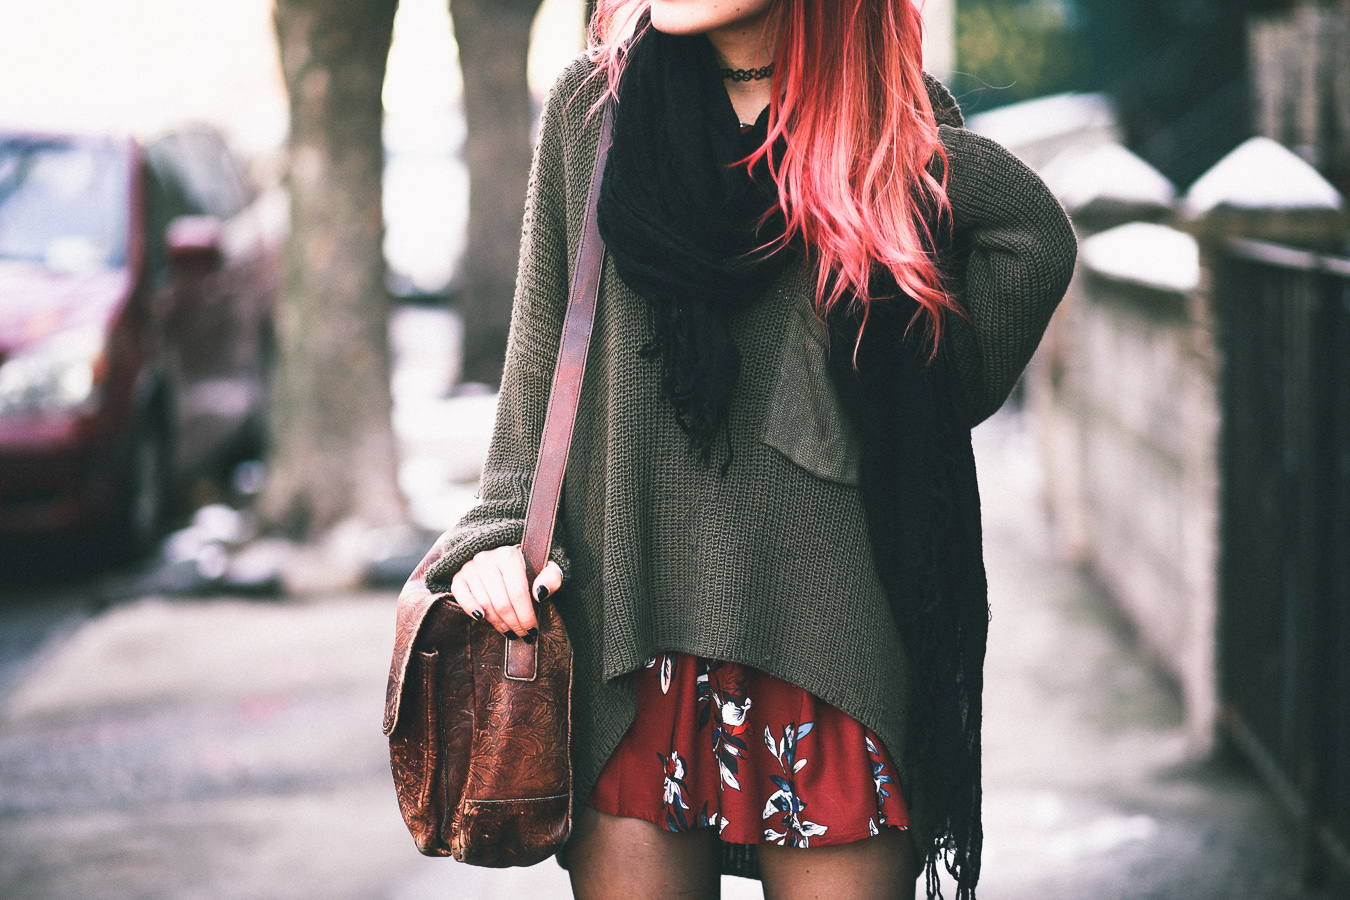 Le Happy wearing chunky green sweater and red floral dress